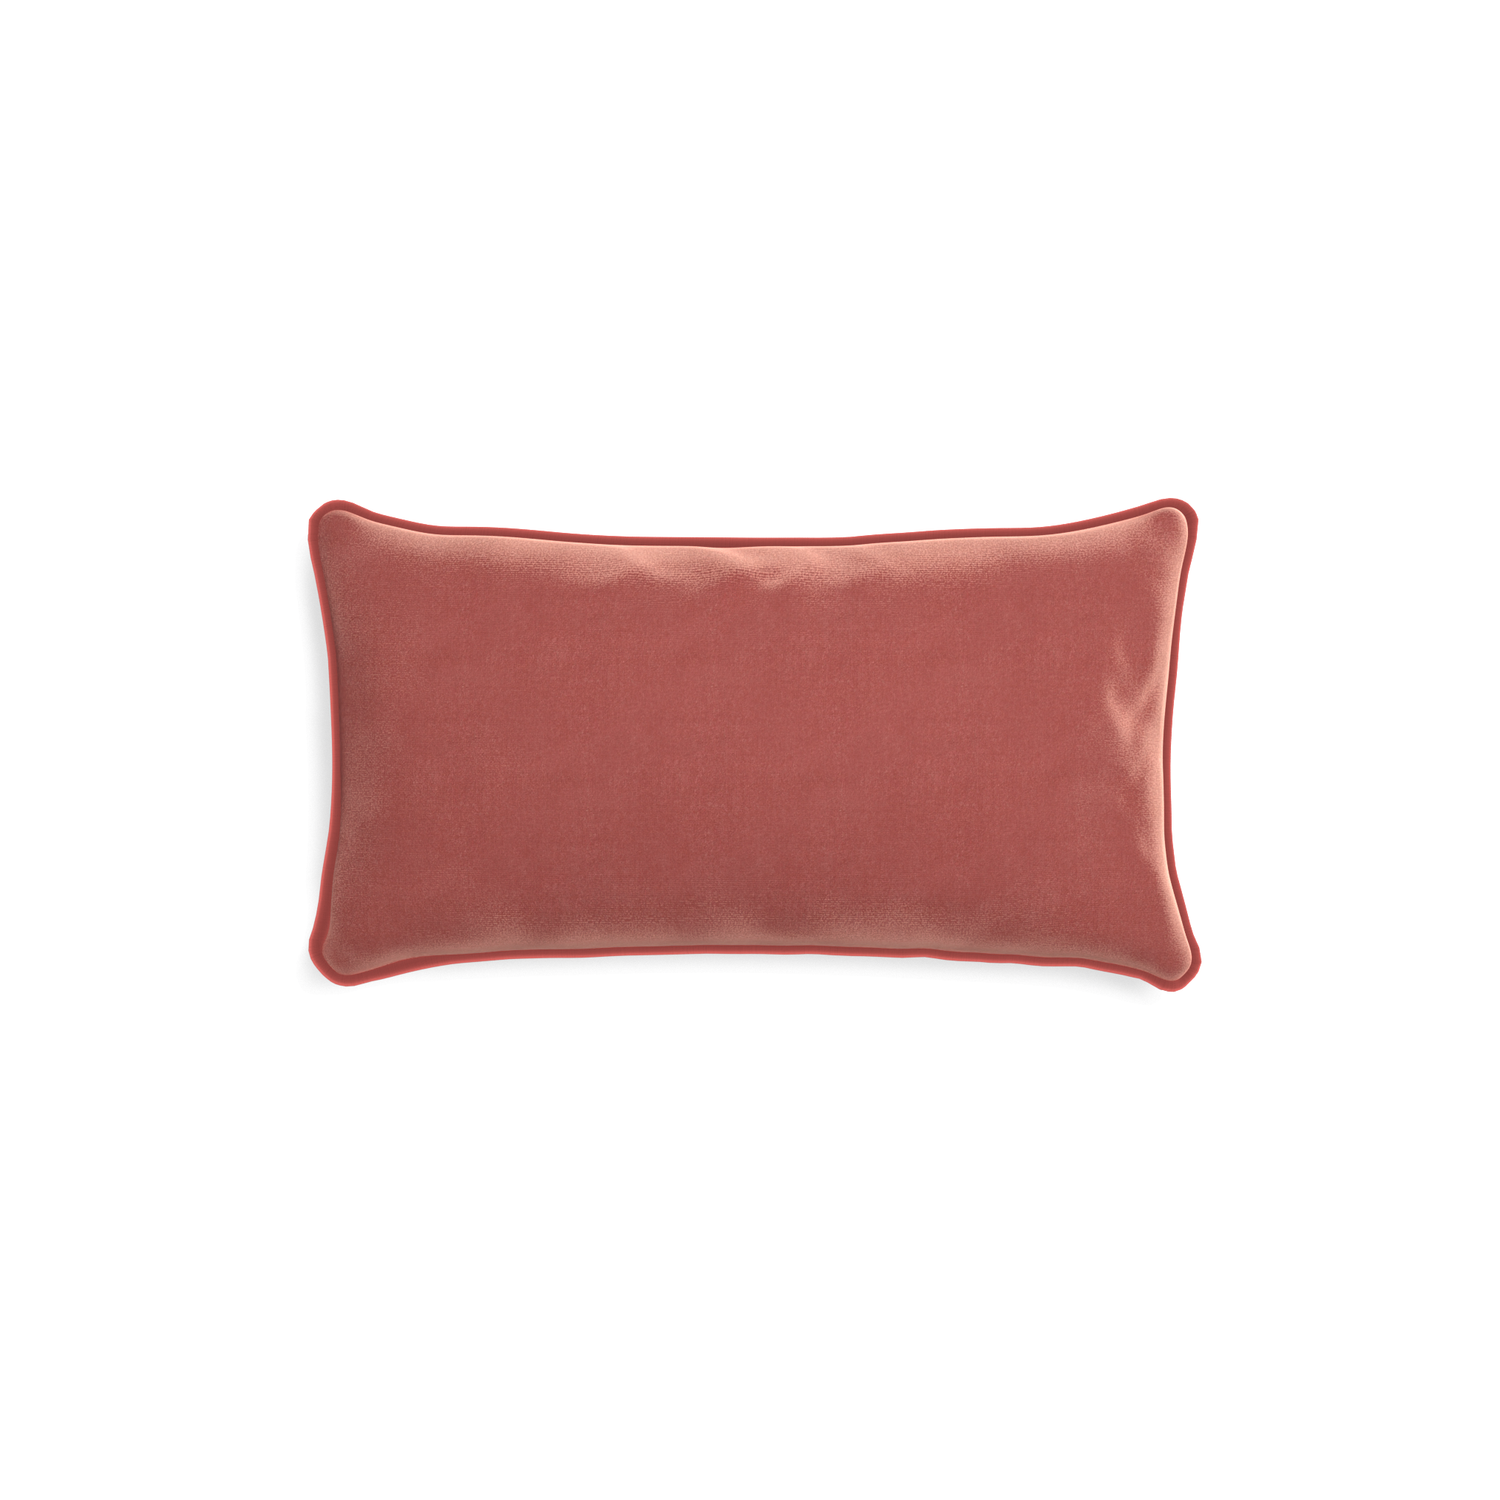 rectangle coral velvet pillow with coral piping